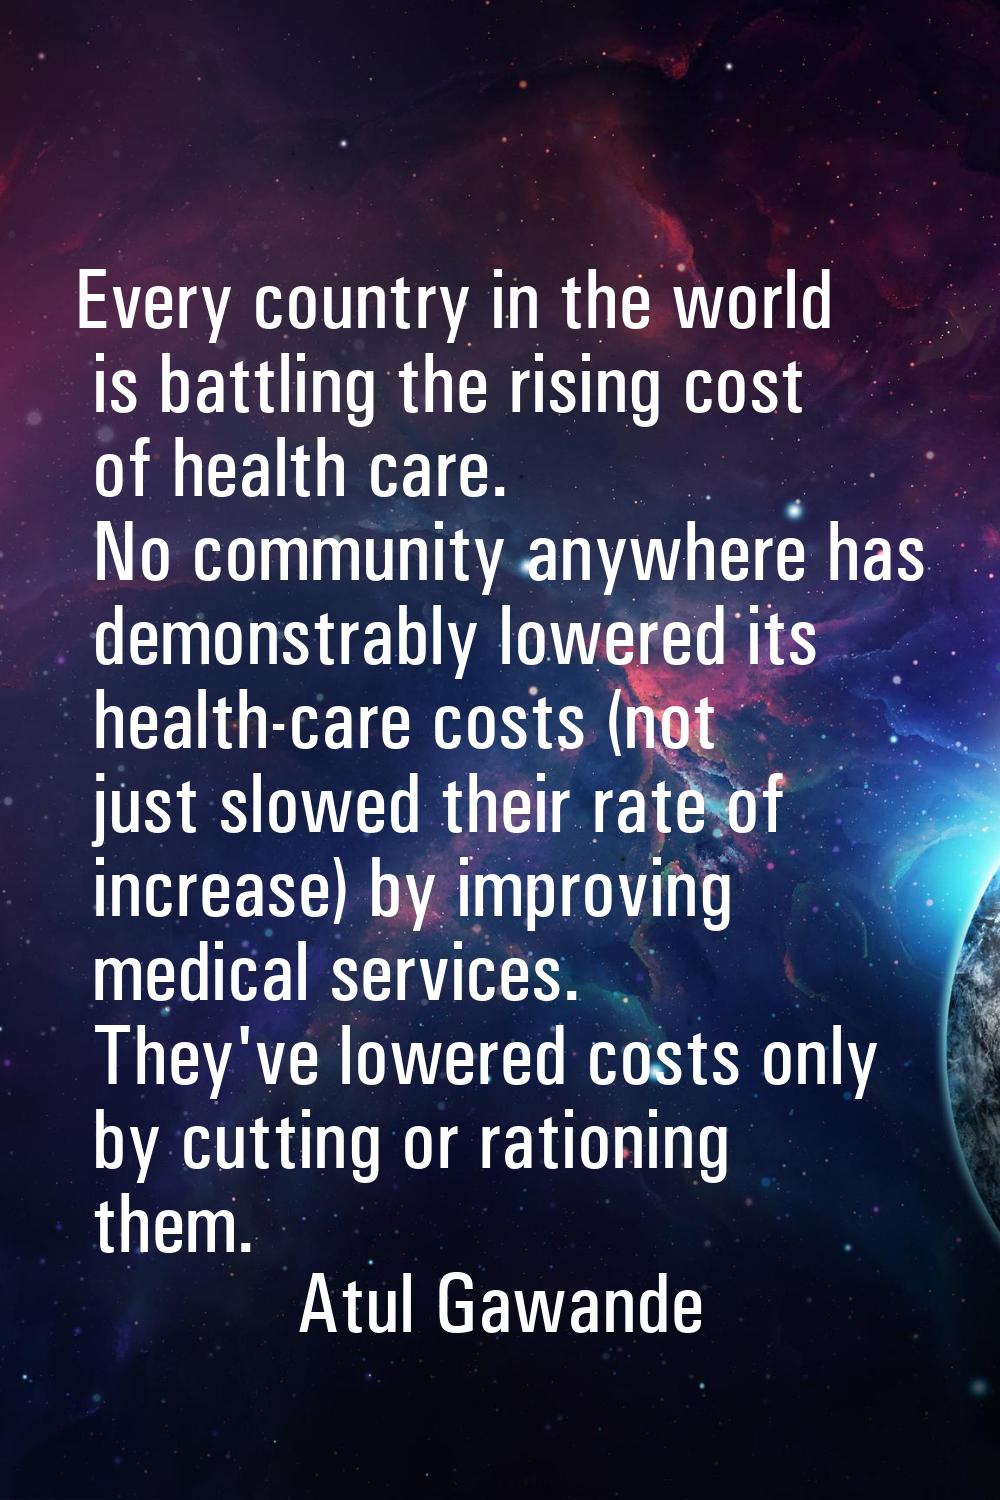 Every country in the world is battling the rising cost of health care. No community anywhere has de